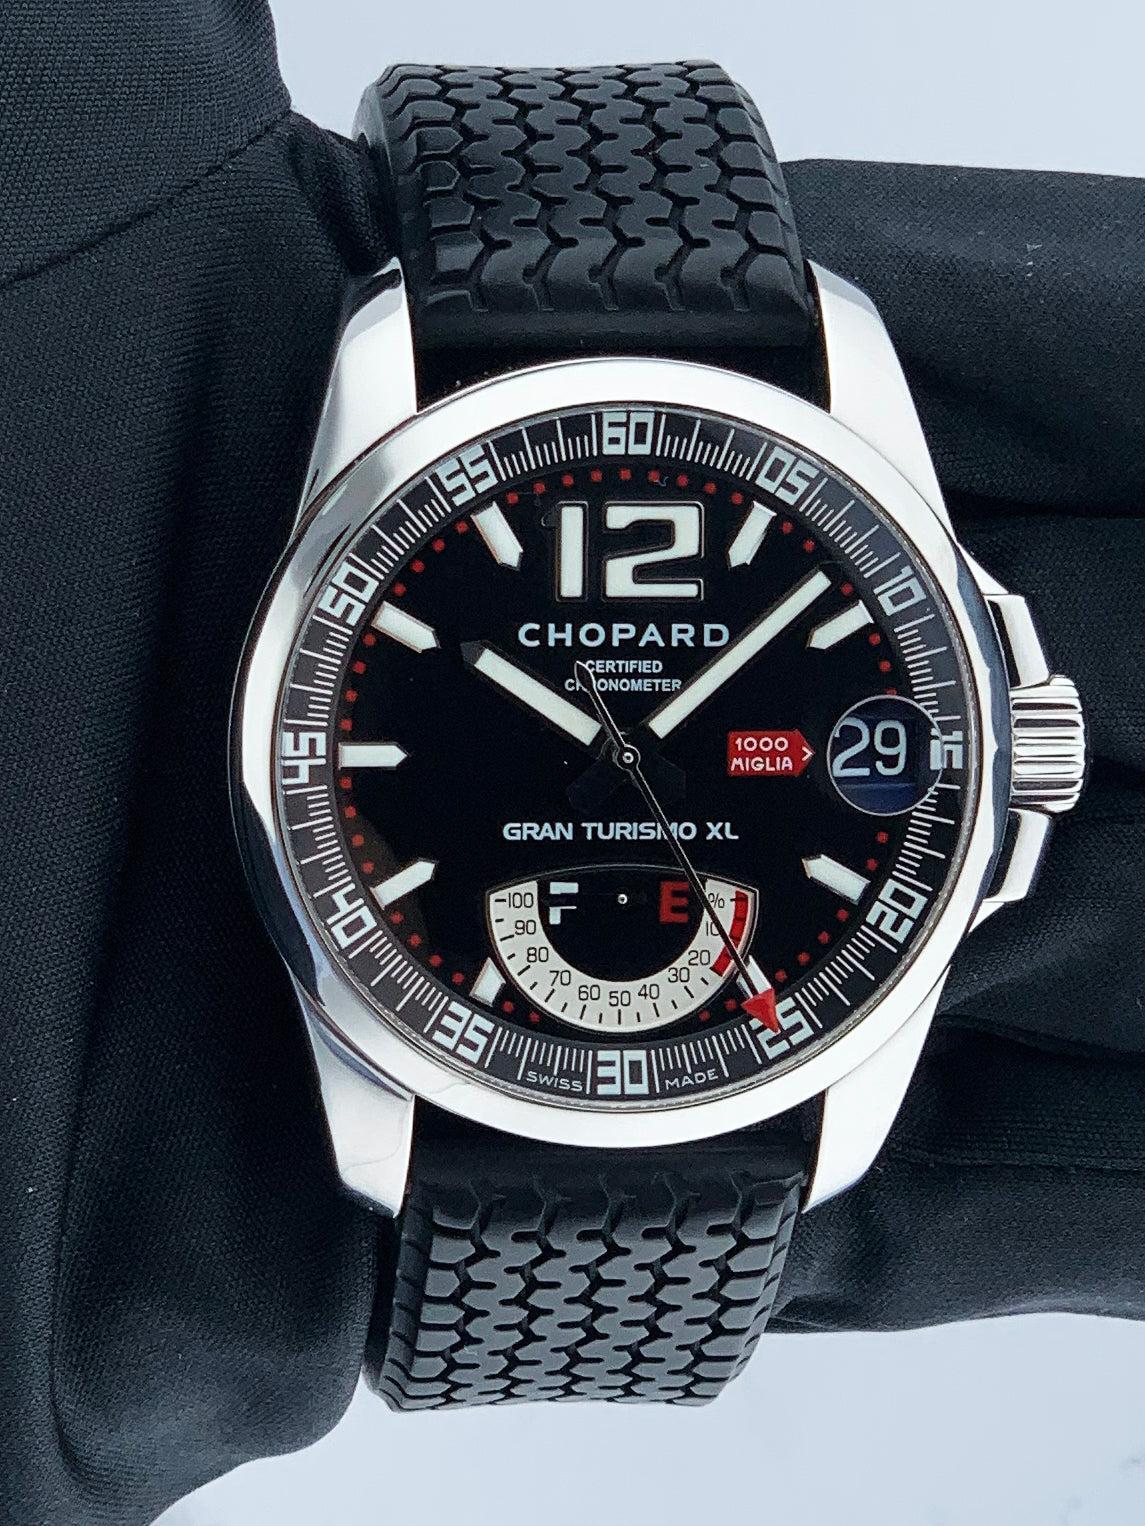 Chopard Mille Miglia GT XL 168457-3001 Mens Watch. 44mm stainless steel case with stainless steel fixed  bezel. Black dial with luminous sliver hands and index hour makers. Arabic numeral at the 12 o'clock position. Minute markers on the outer dial.